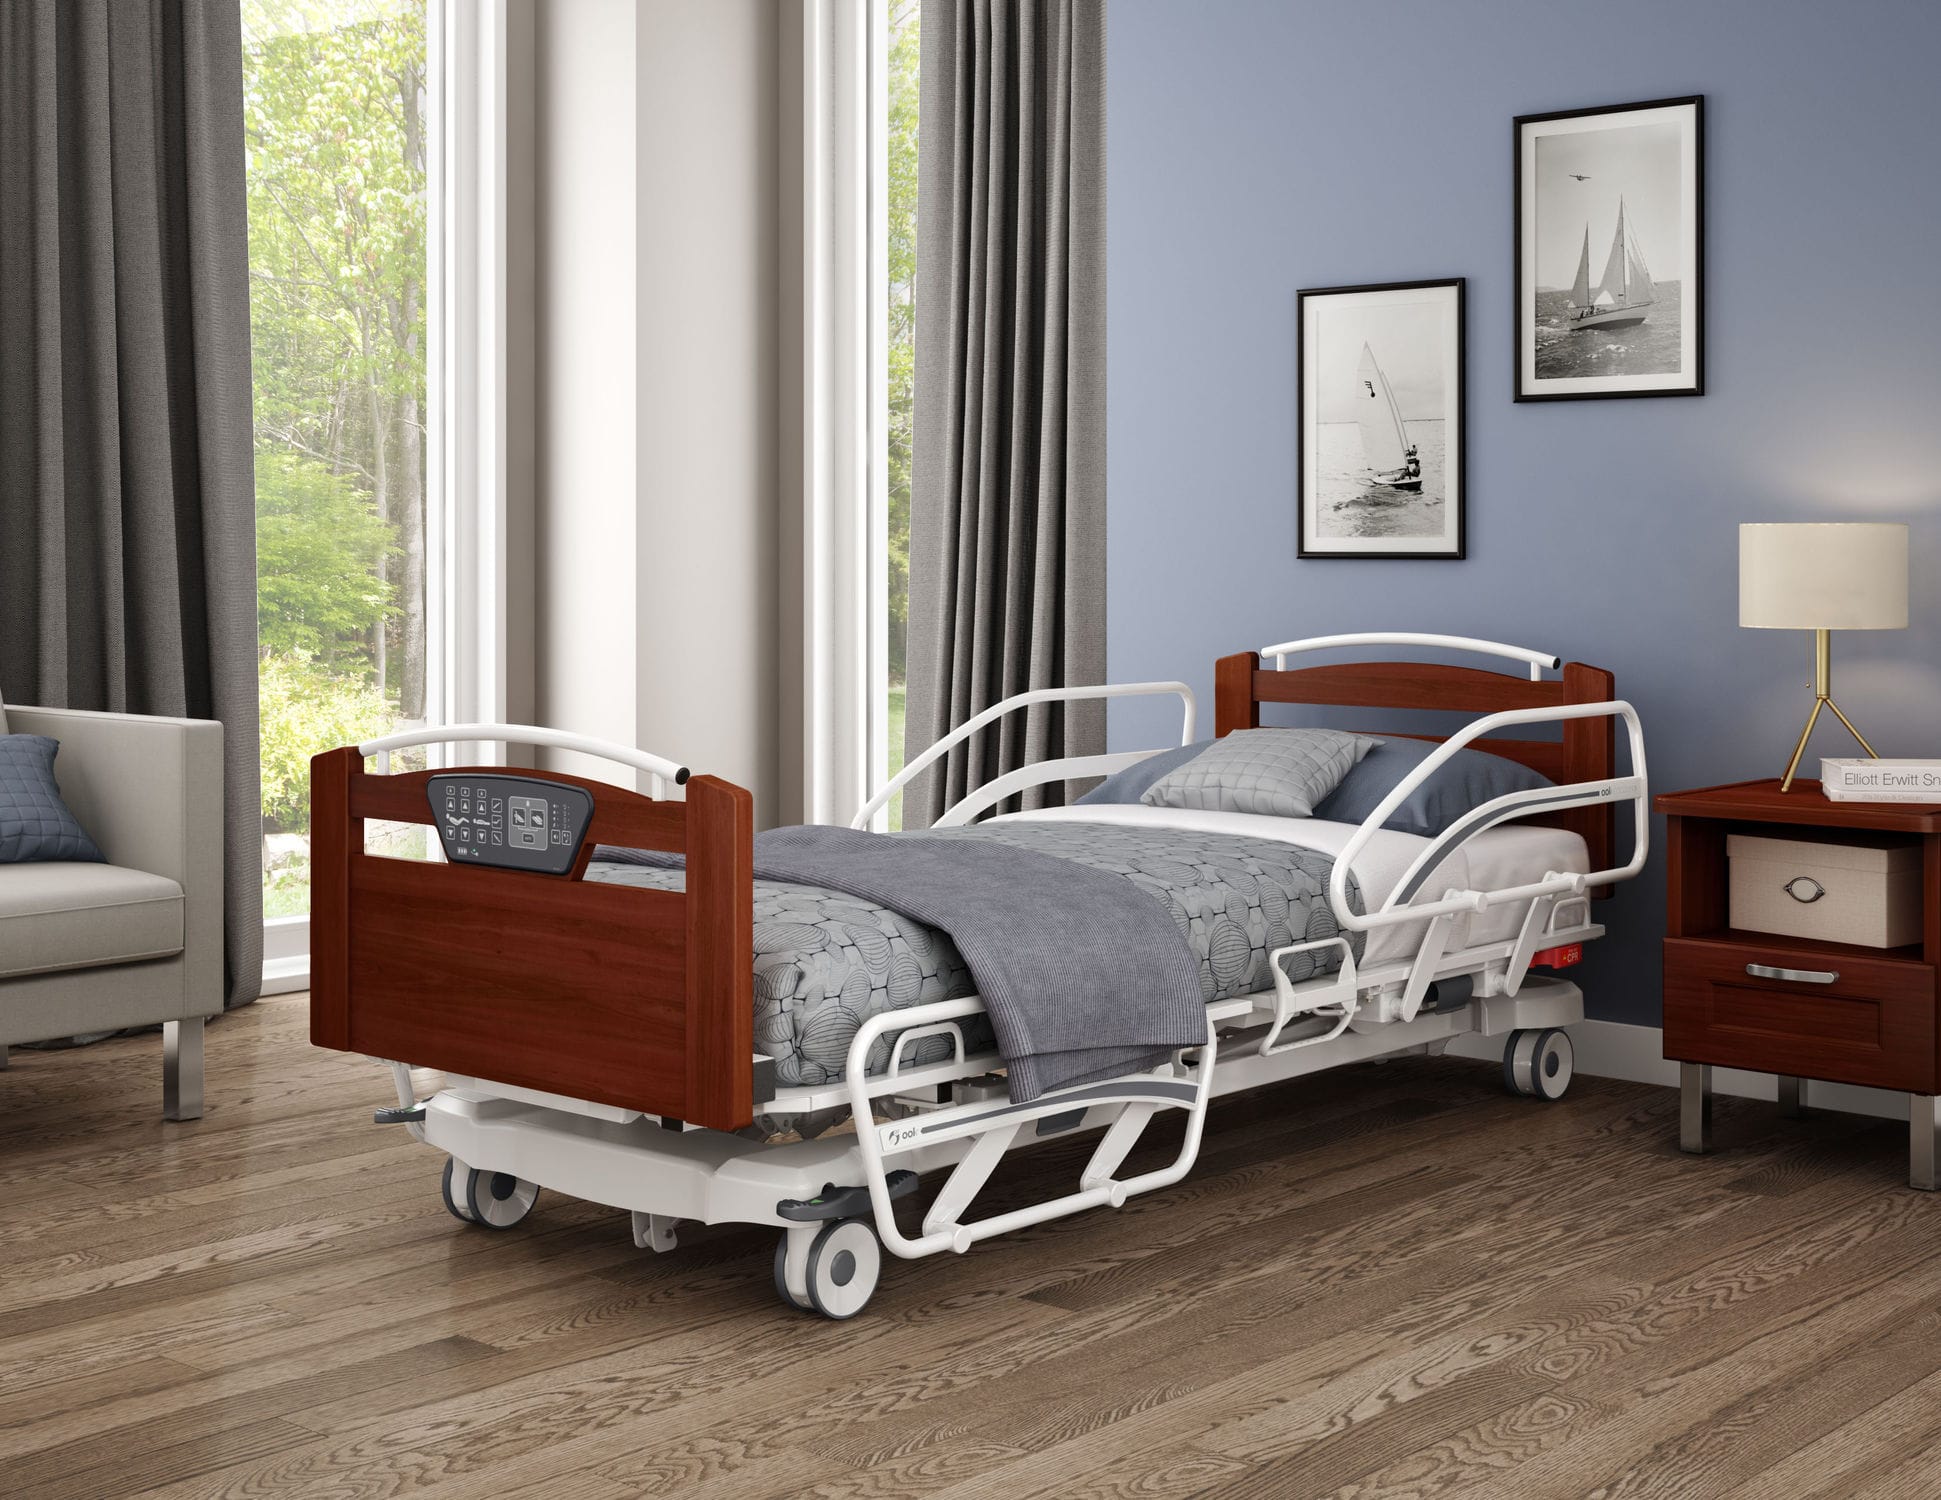 Best Hospital Bed for Home Care -